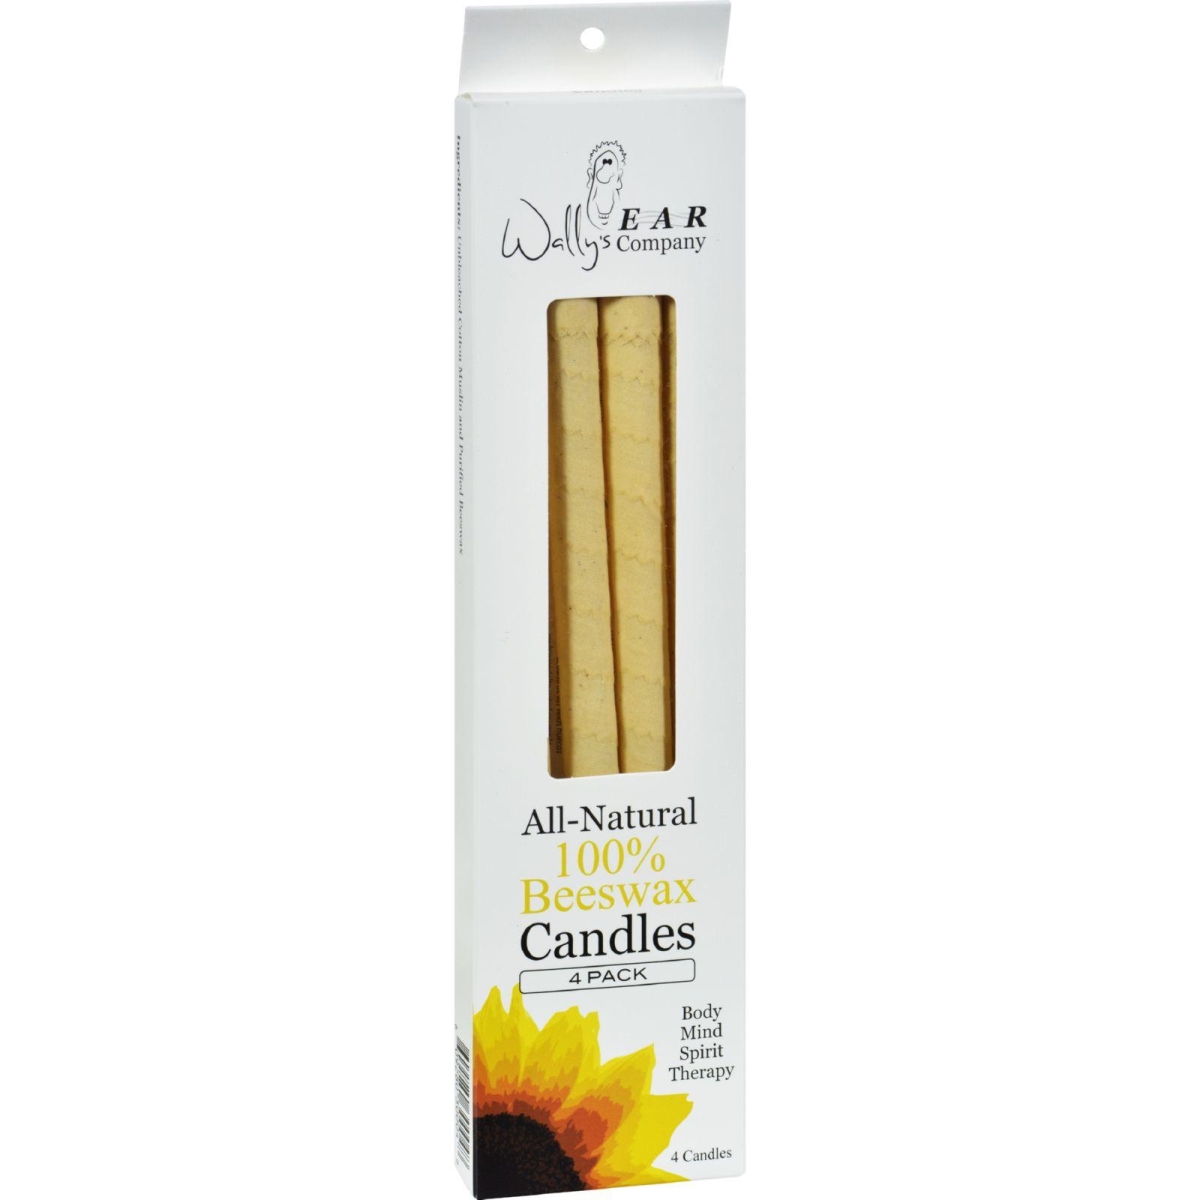 Hg0115949 Ear Candles Beeswax - 4 Candles